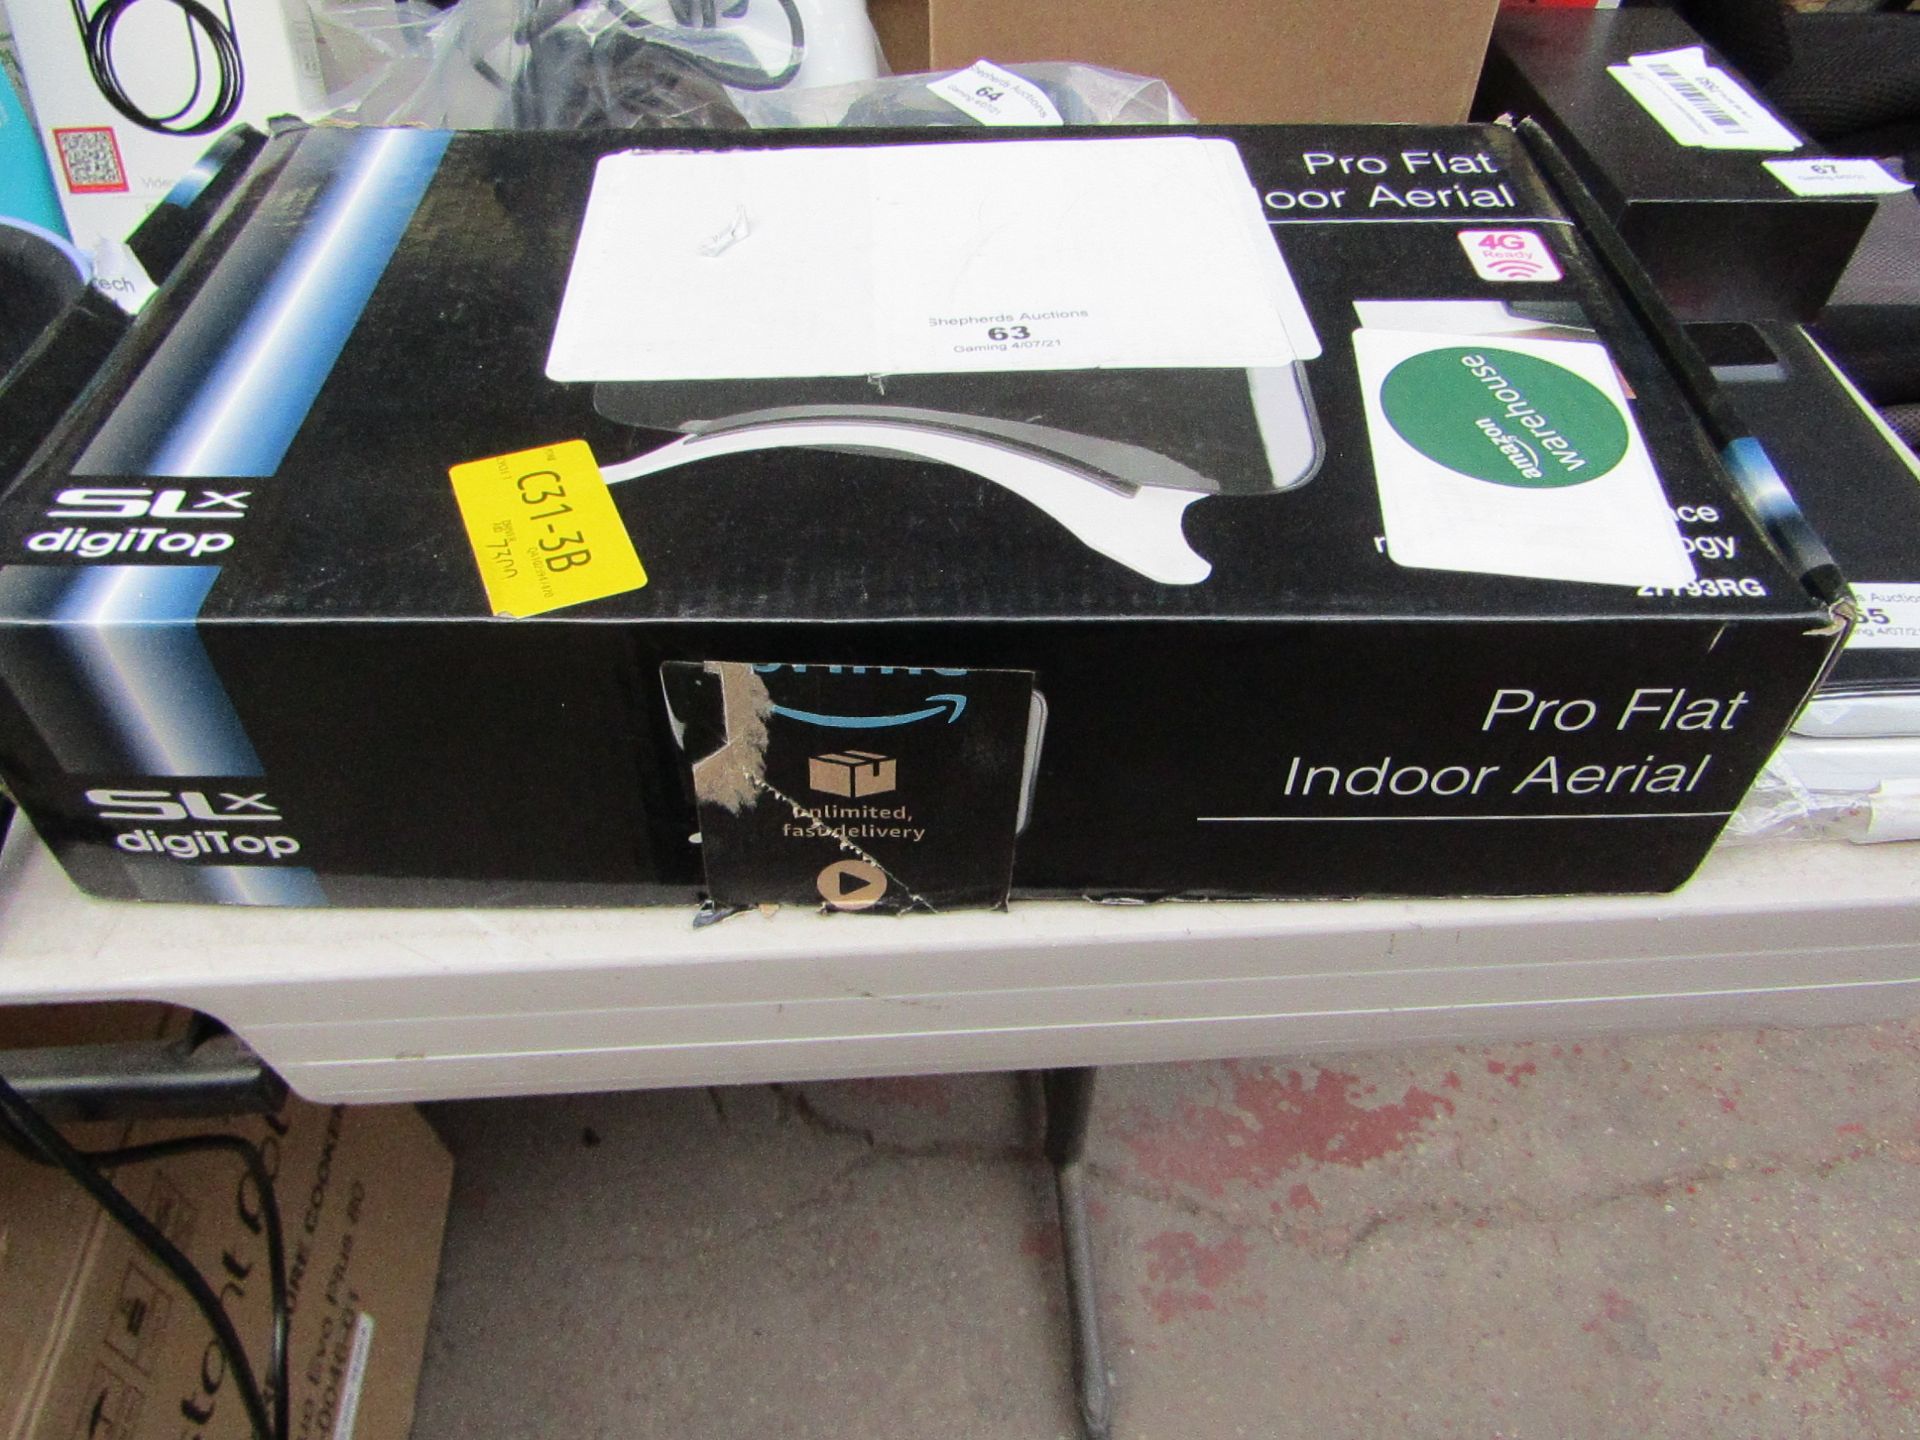 SLX - Pro Flat Indoor Aerial - Unchecked & Boxed.